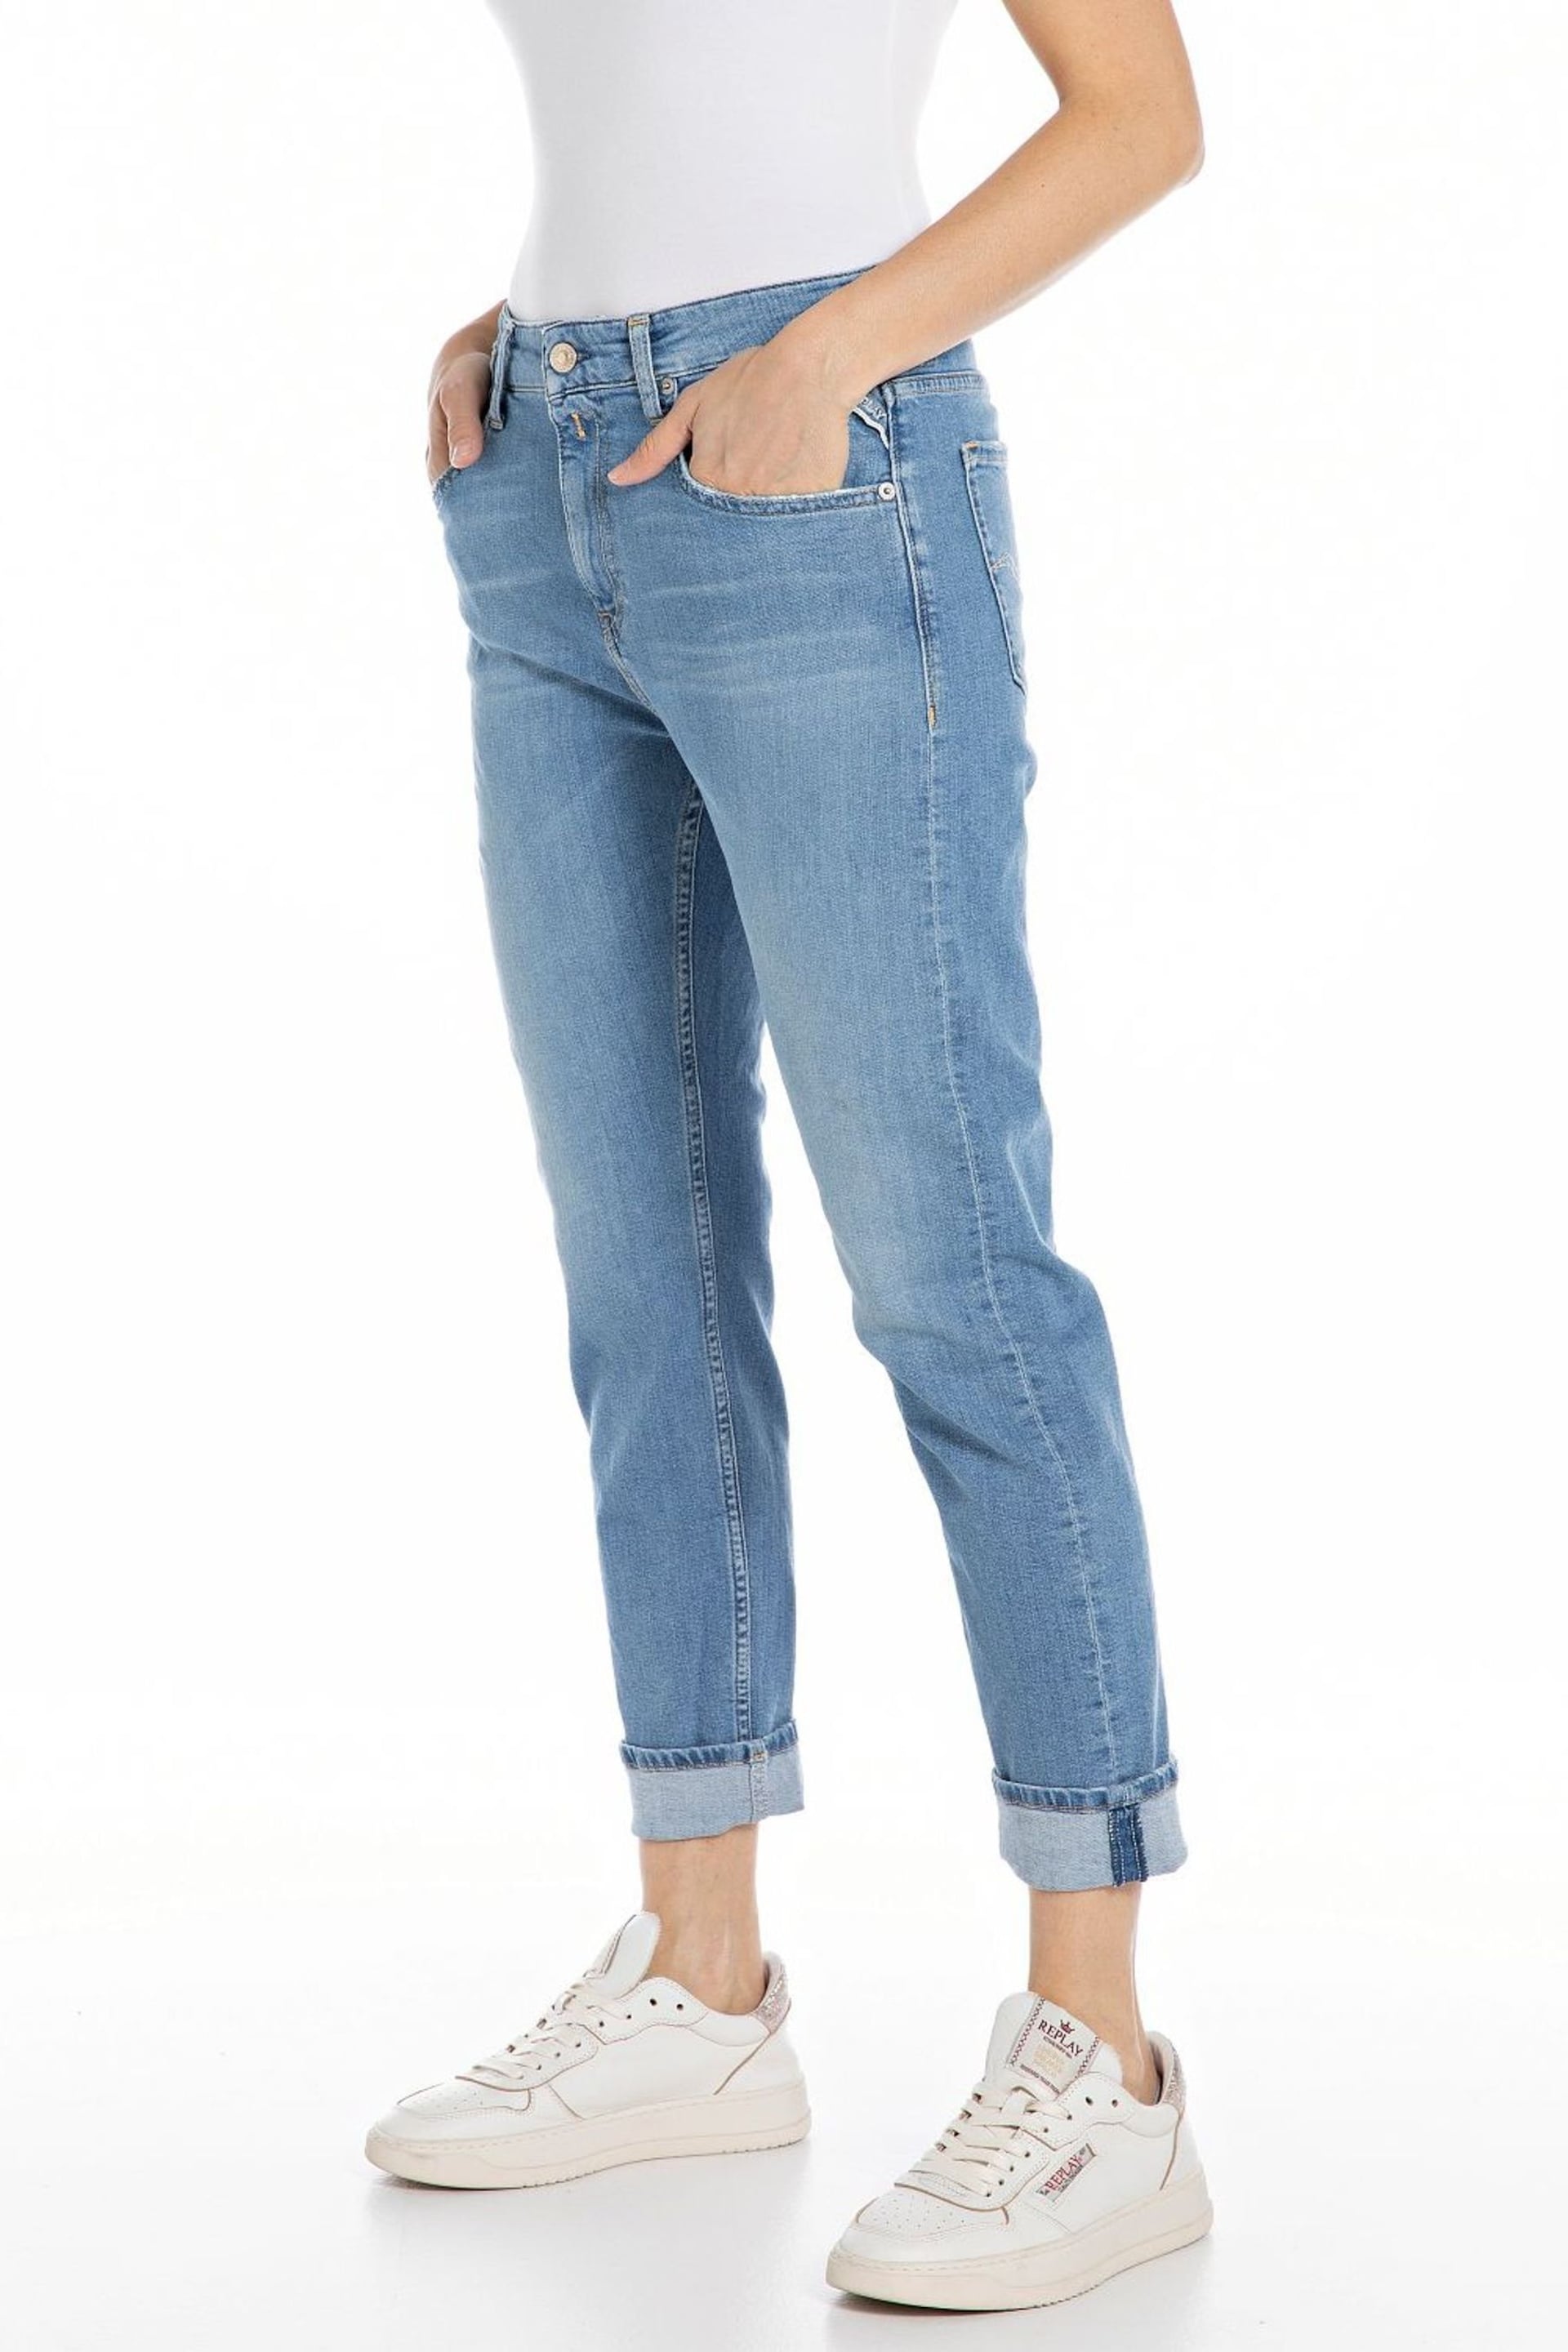 Replay Marty Boyfriend Fit Jeans - Image 4 of 4